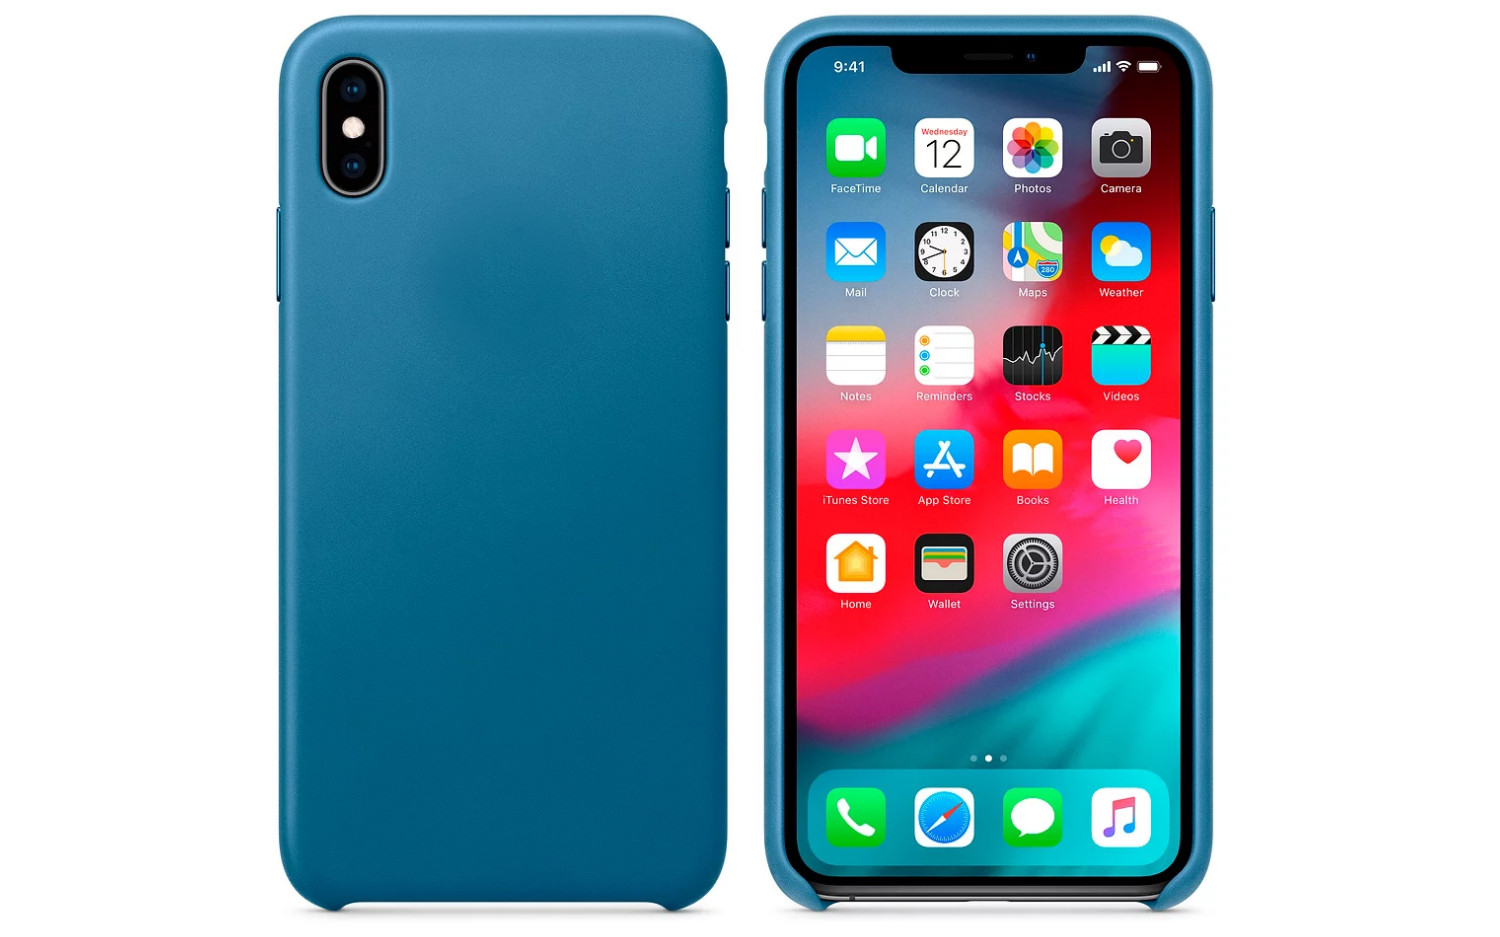 Apple iphone XS Silicone Case (mrwc2zm/a)